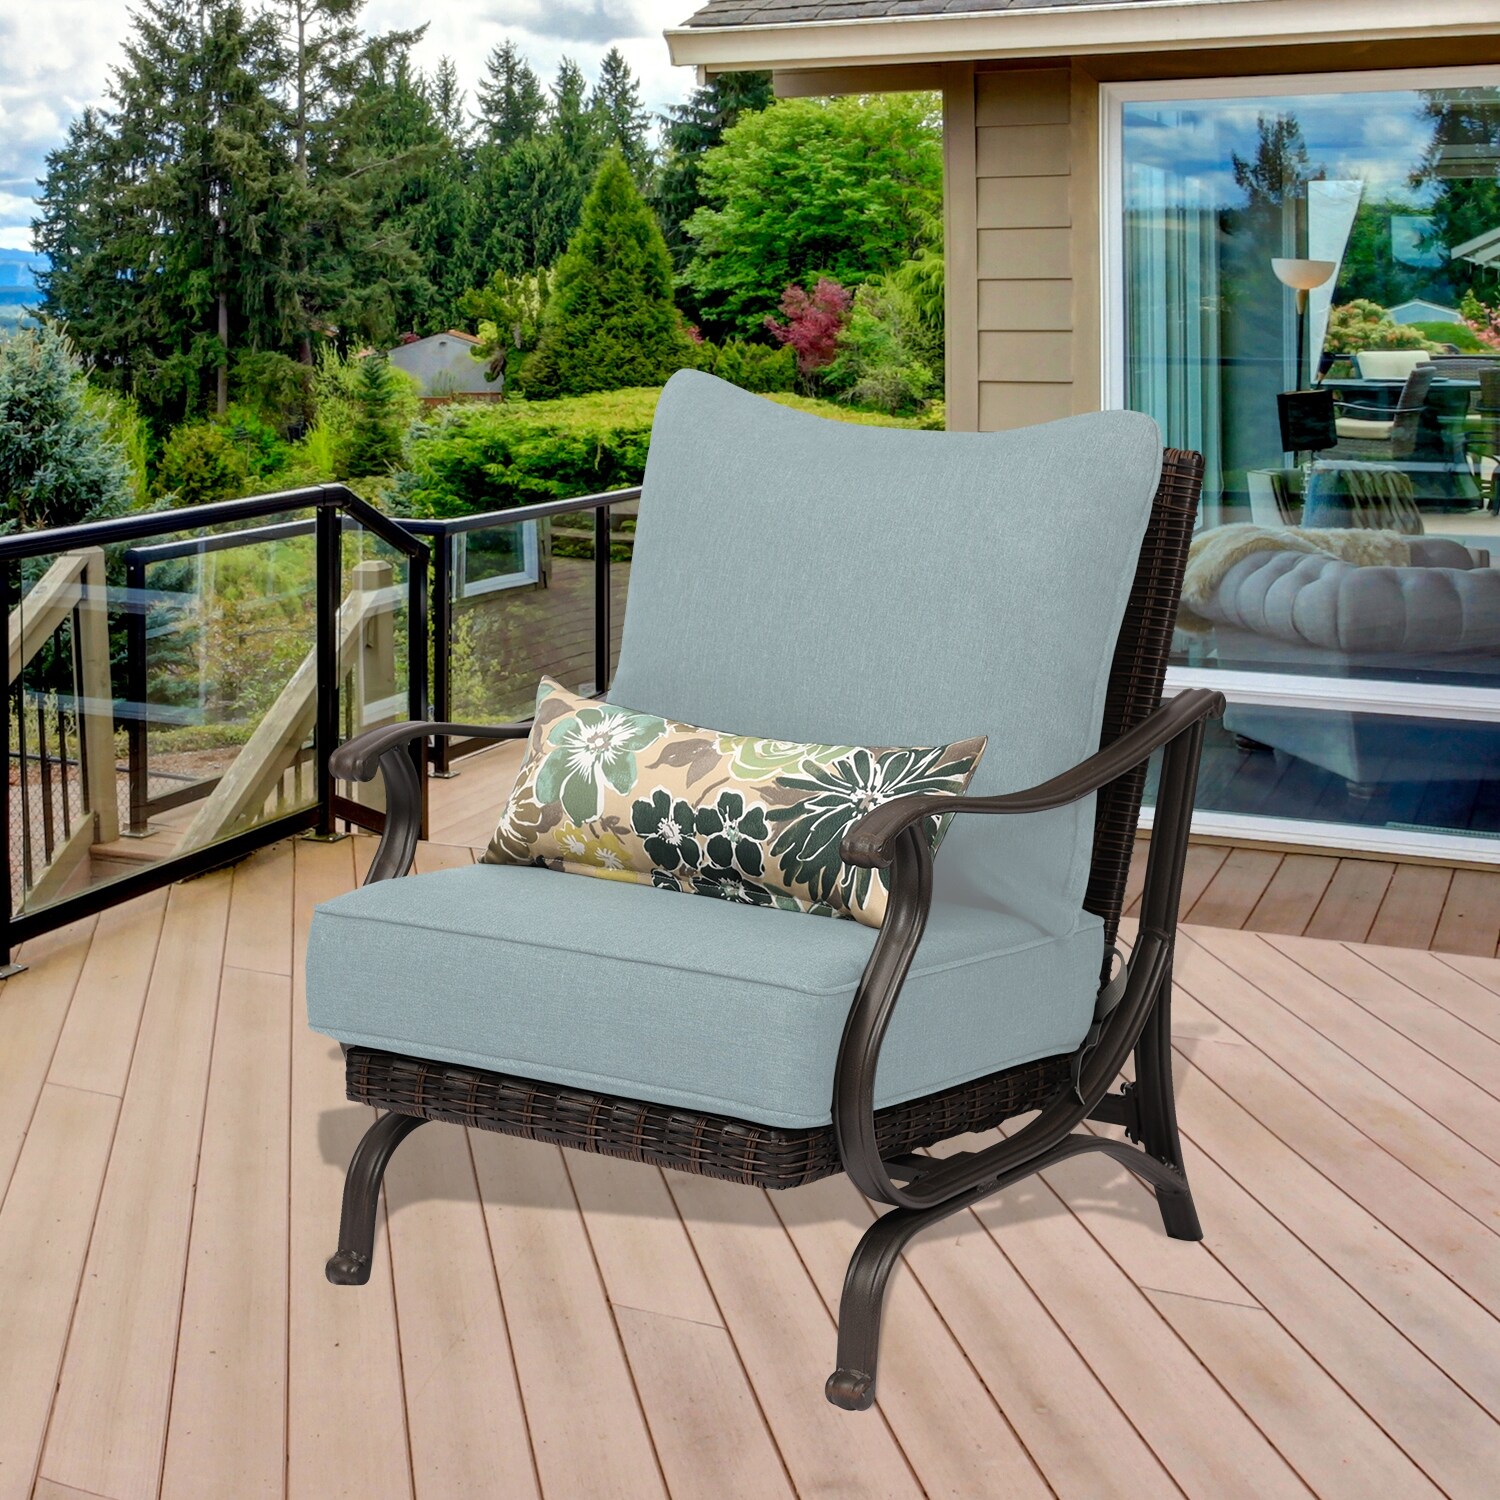 https://ak1.ostkcdn.com/images/products/is/images/direct/65d608aa5de44137991d519e69eaf9e09a1a2b0a/Aoodor-Patio-Furniture-Outdoor-Deep-Seat-Cushion-%282-Back-2-Seater-2-Pillow-%29.jpg